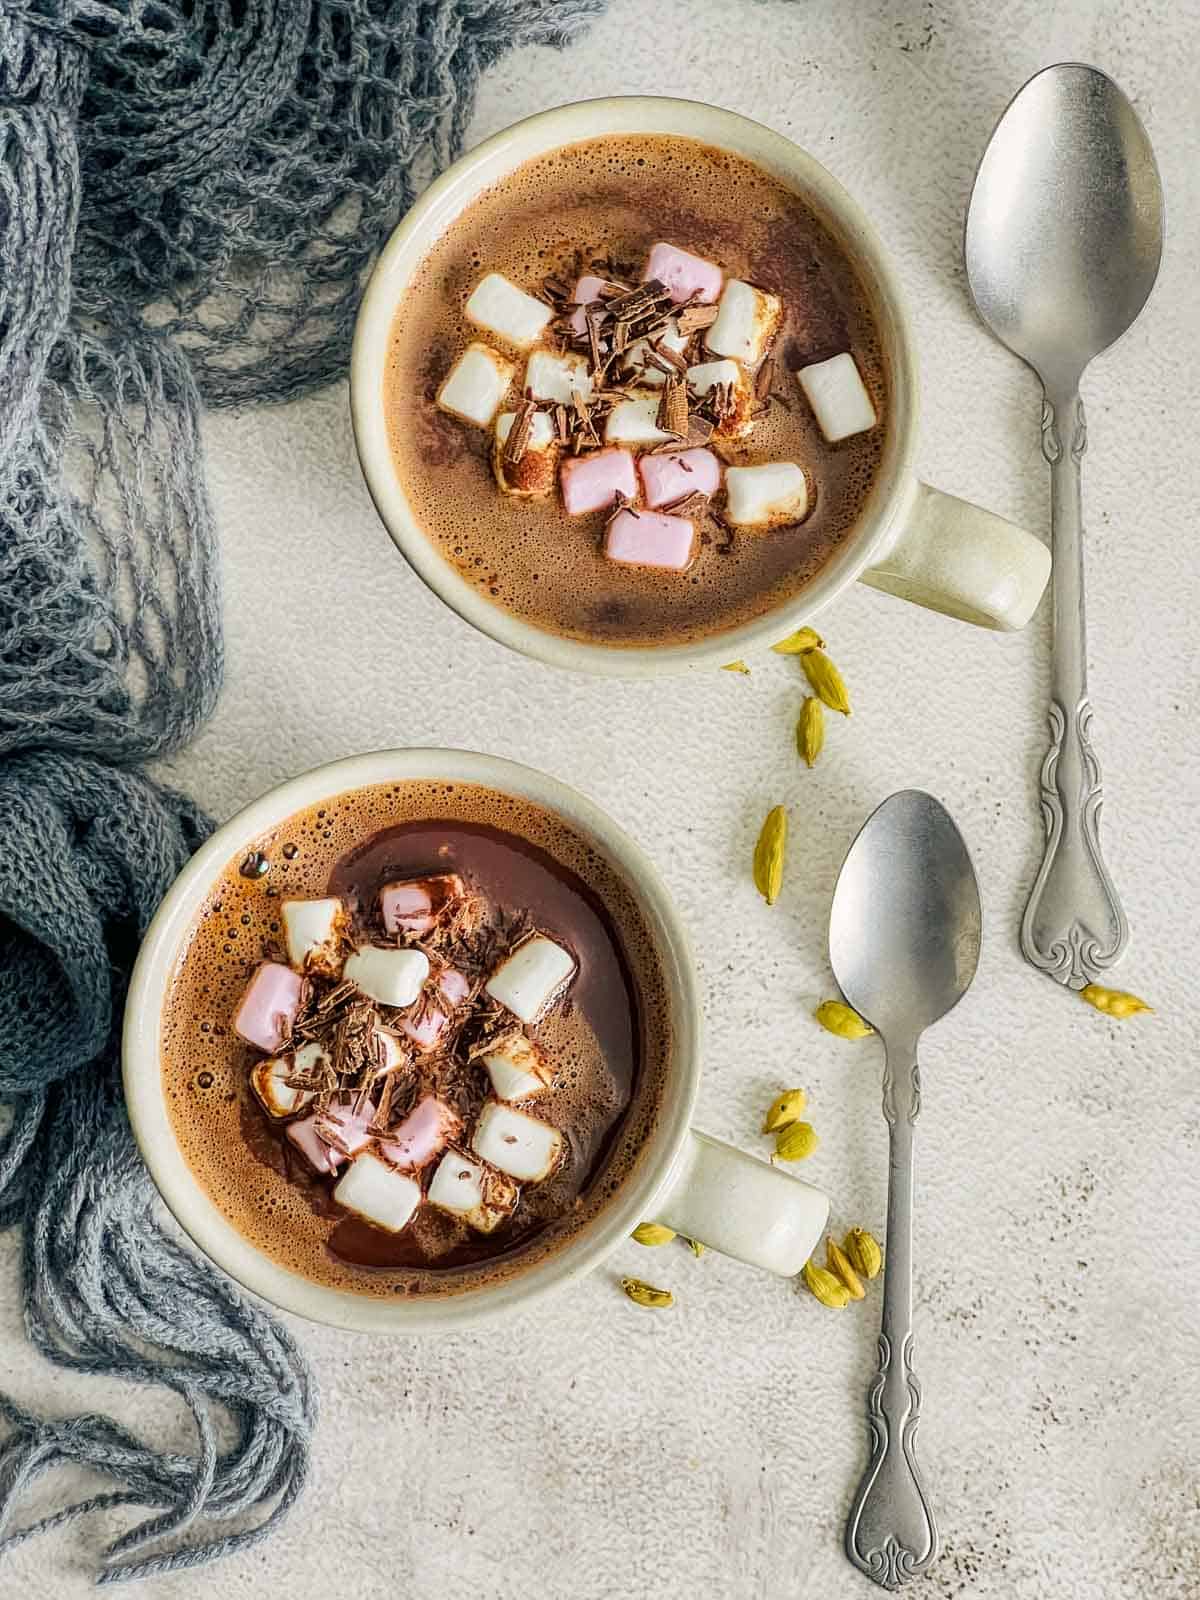 Two mugs of cardamom  hot chocolate topped with marshmallow and placed on a white surface.